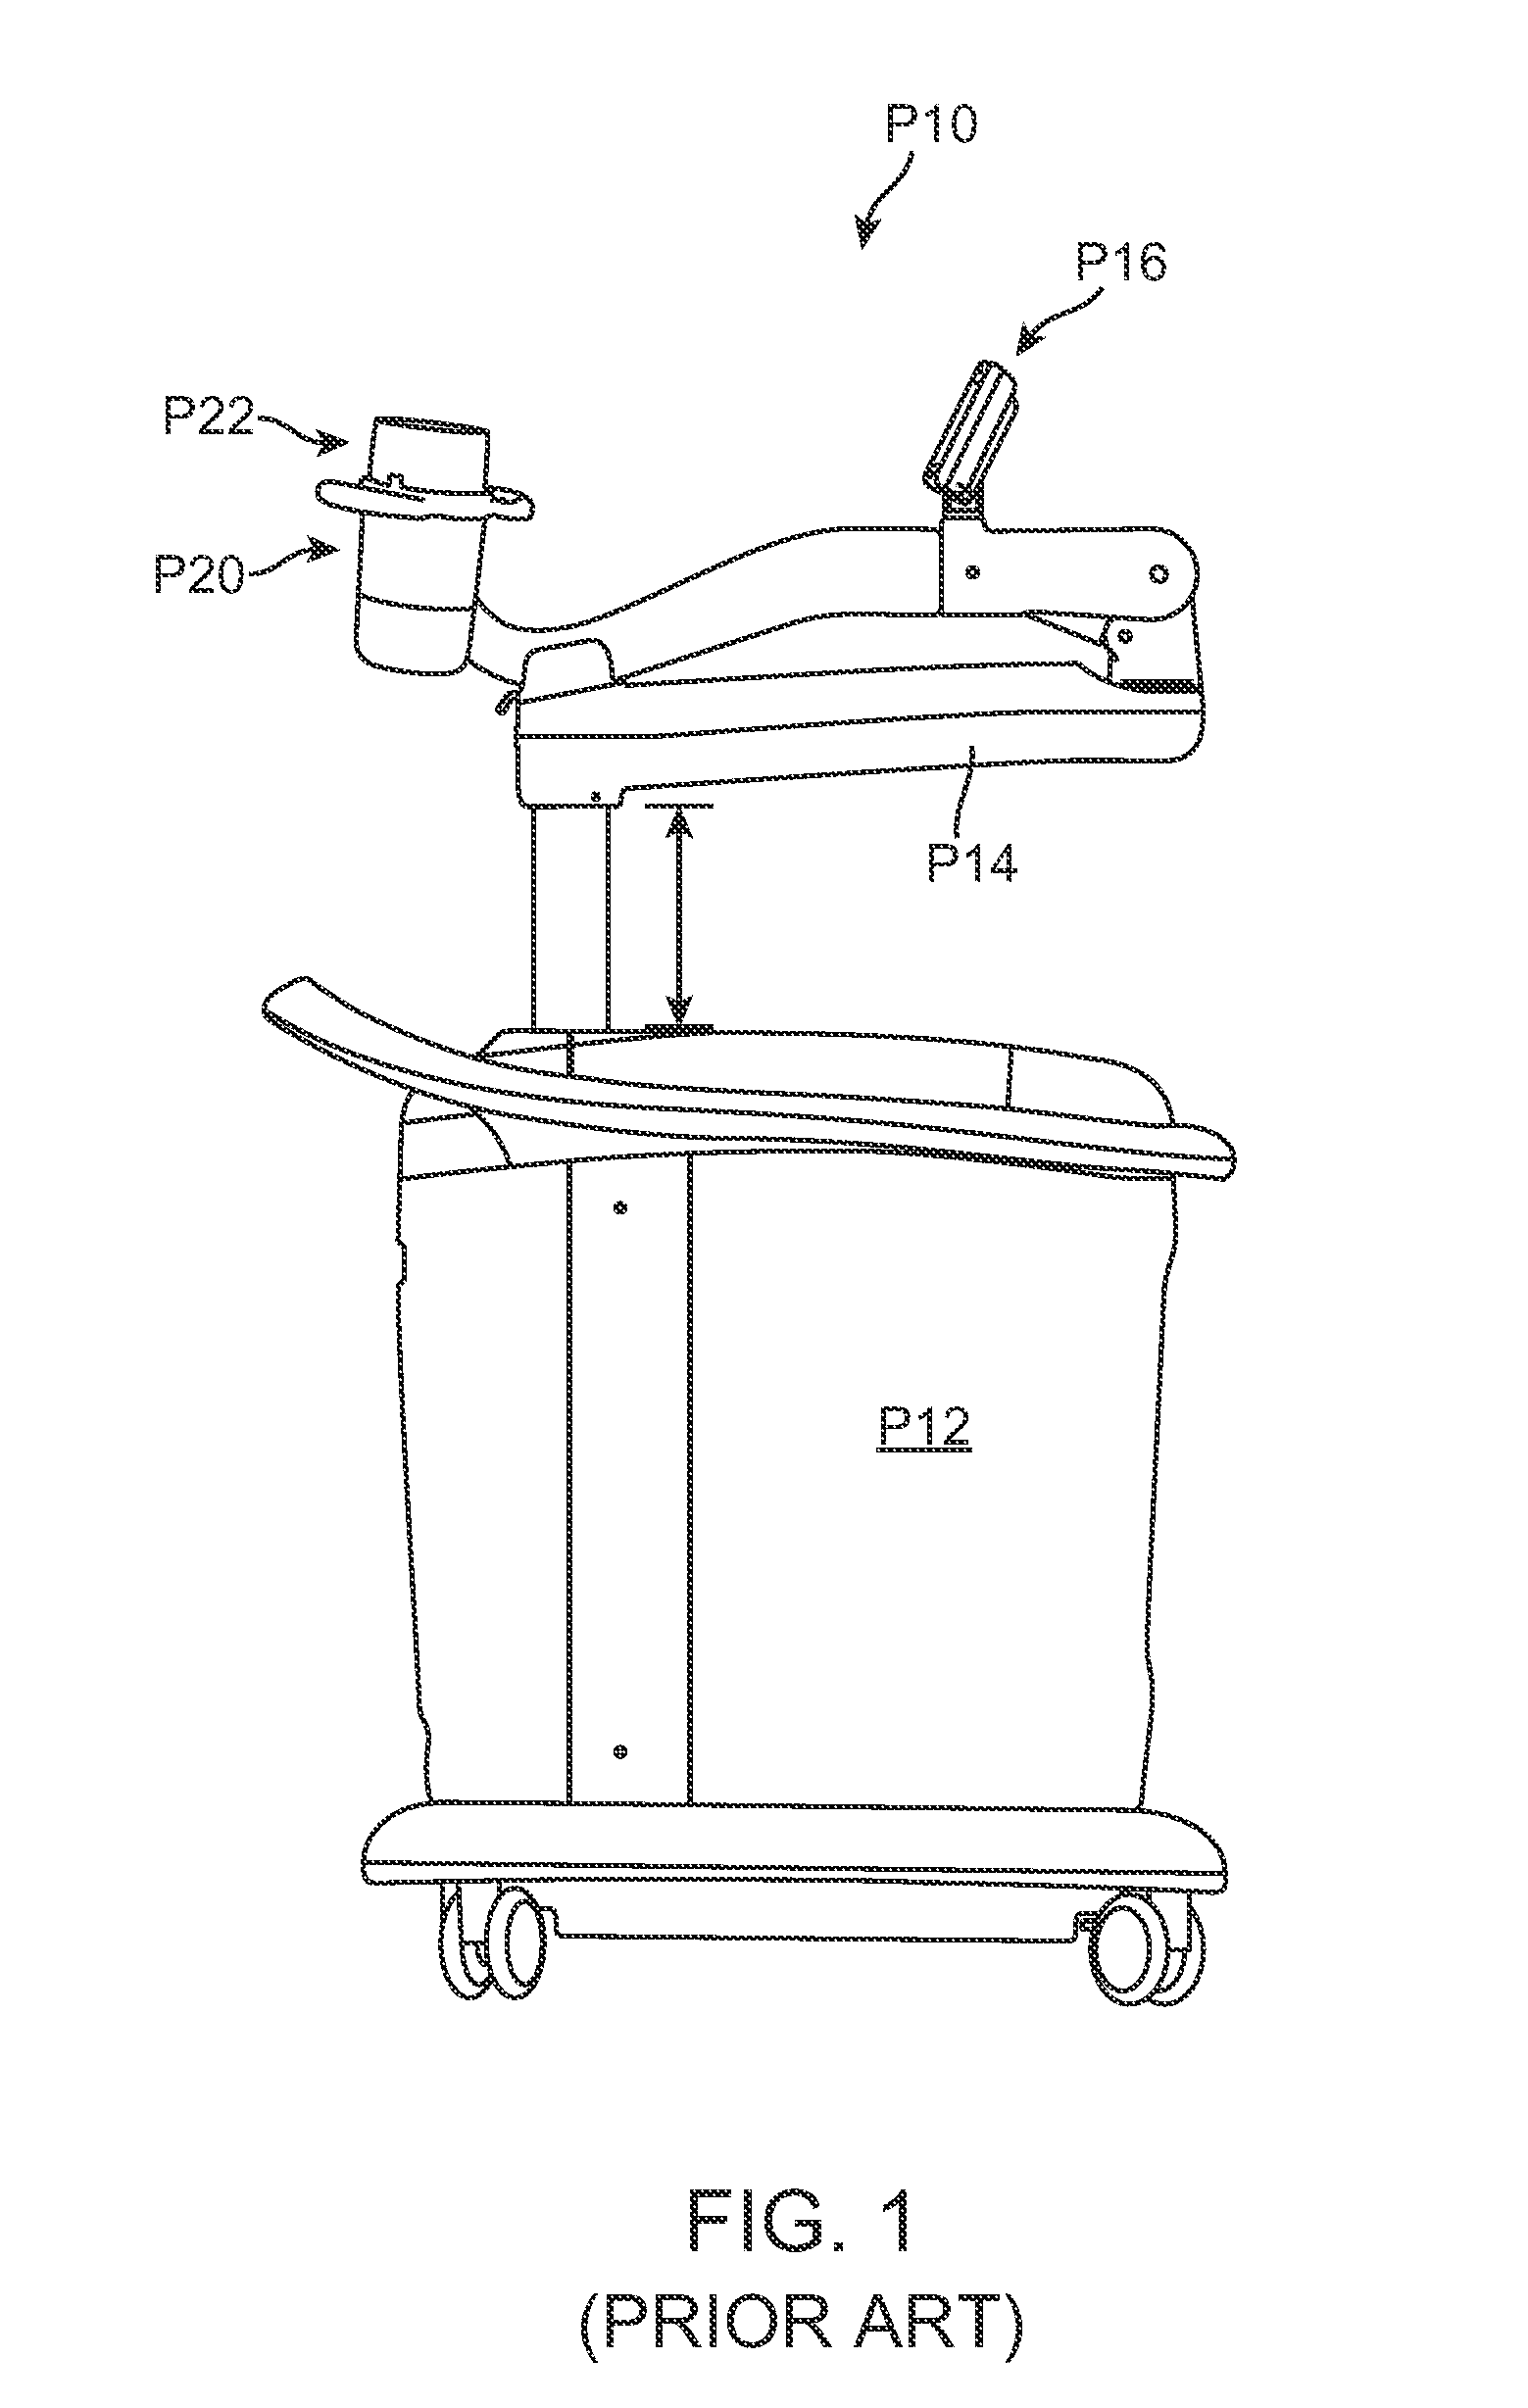 Variable treatment site body contouring using an ultrasound therapy device